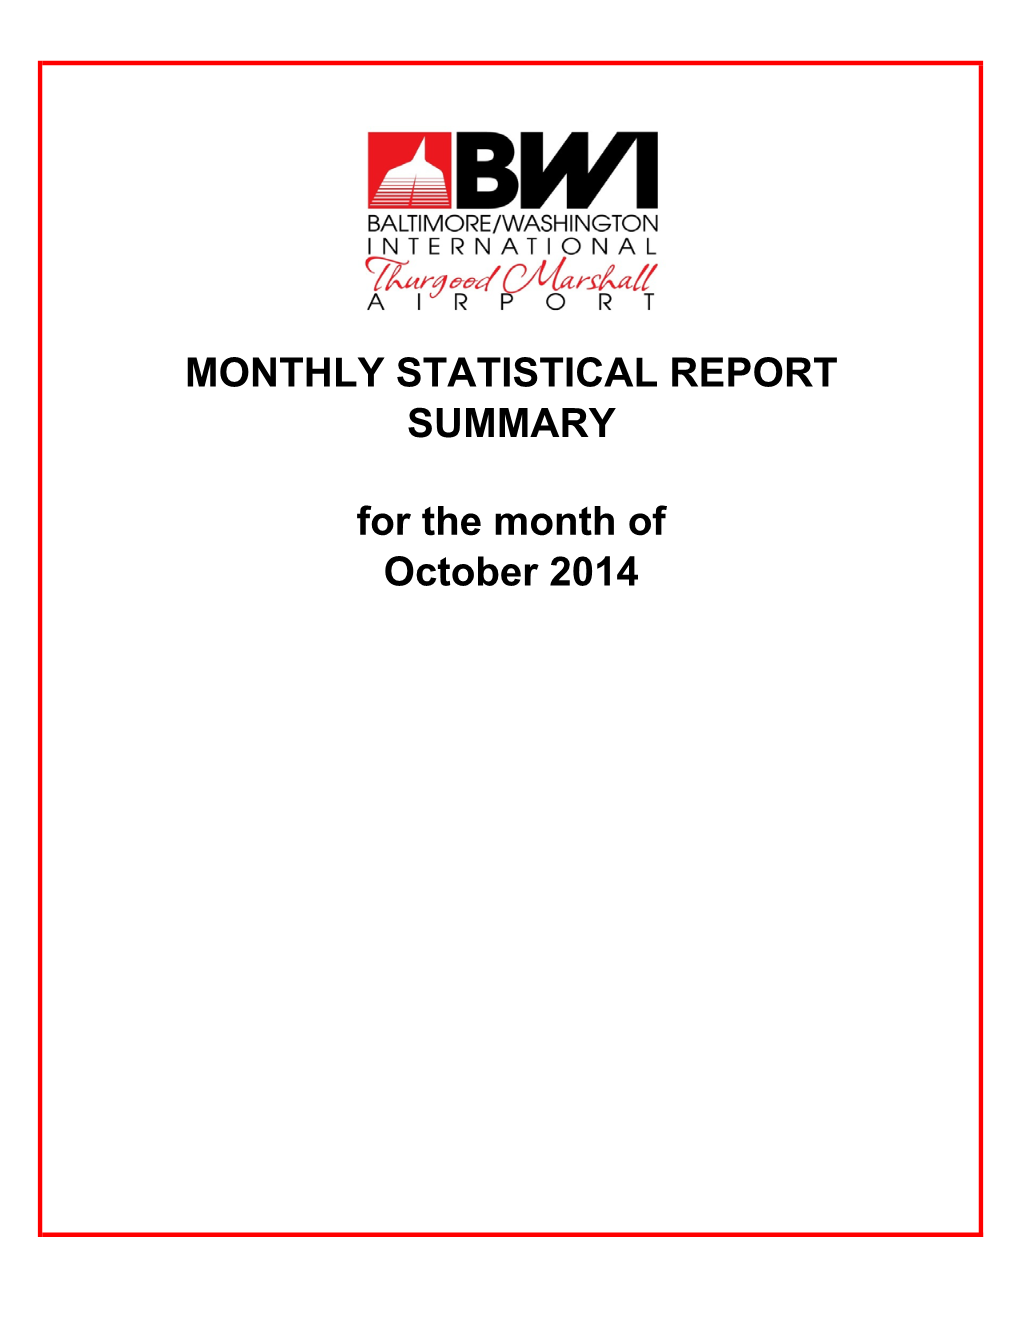 October 2014 SUMMARY MONTHLY STATISTICAL REPORT for The